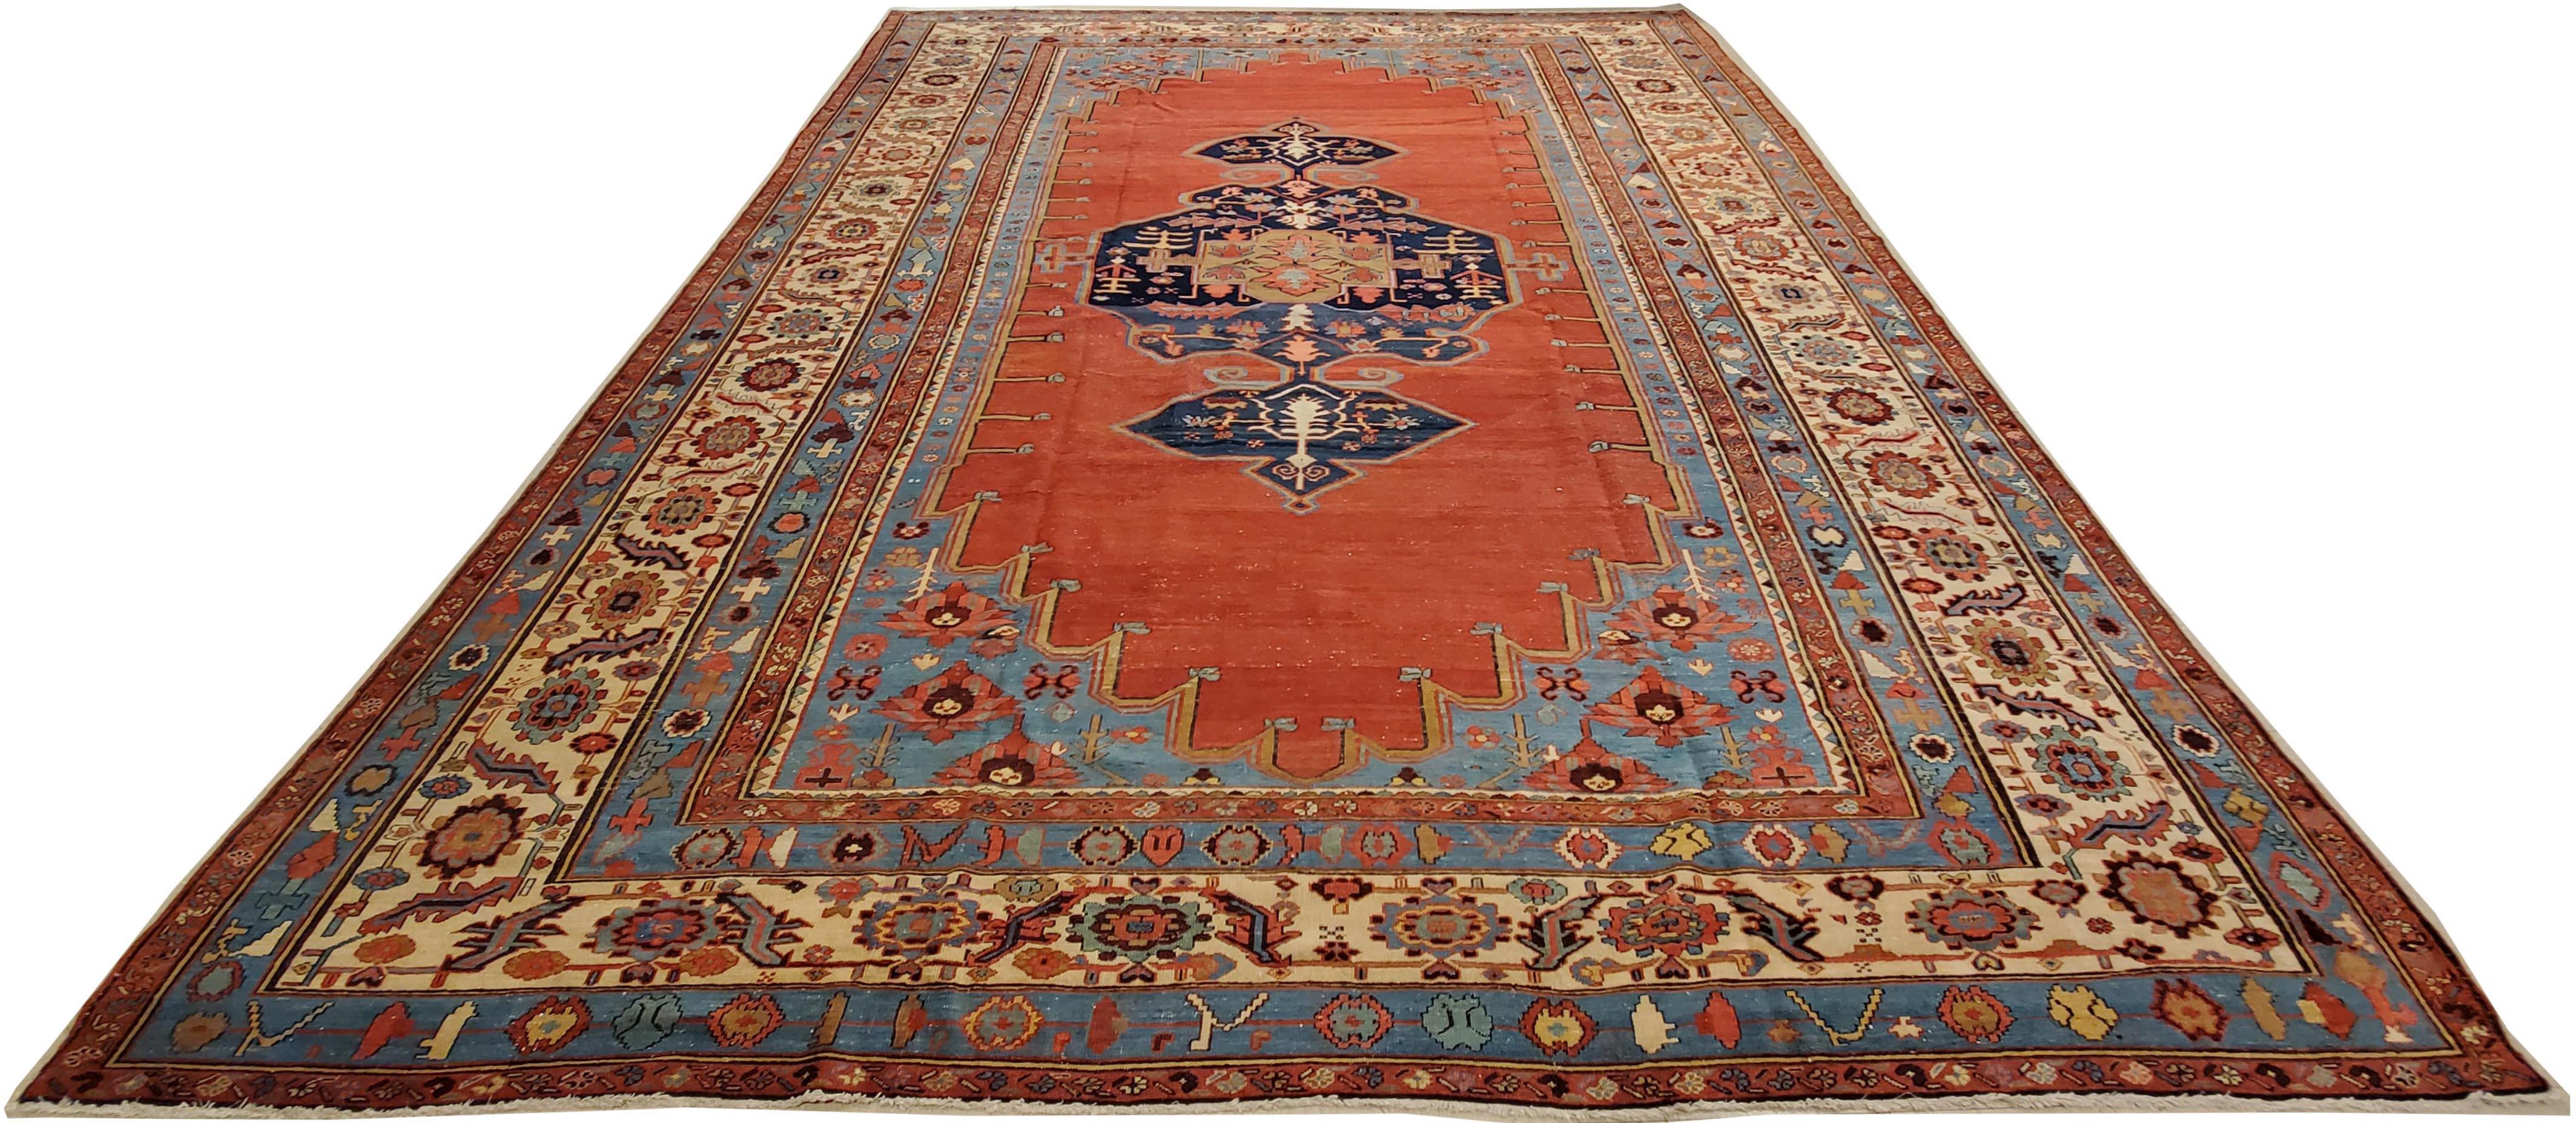 Antique Bakshaish Carpet, Oriental Persian Handmade in Ivory, Blue and Red In Excellent Condition For Sale In Port Washington, NY